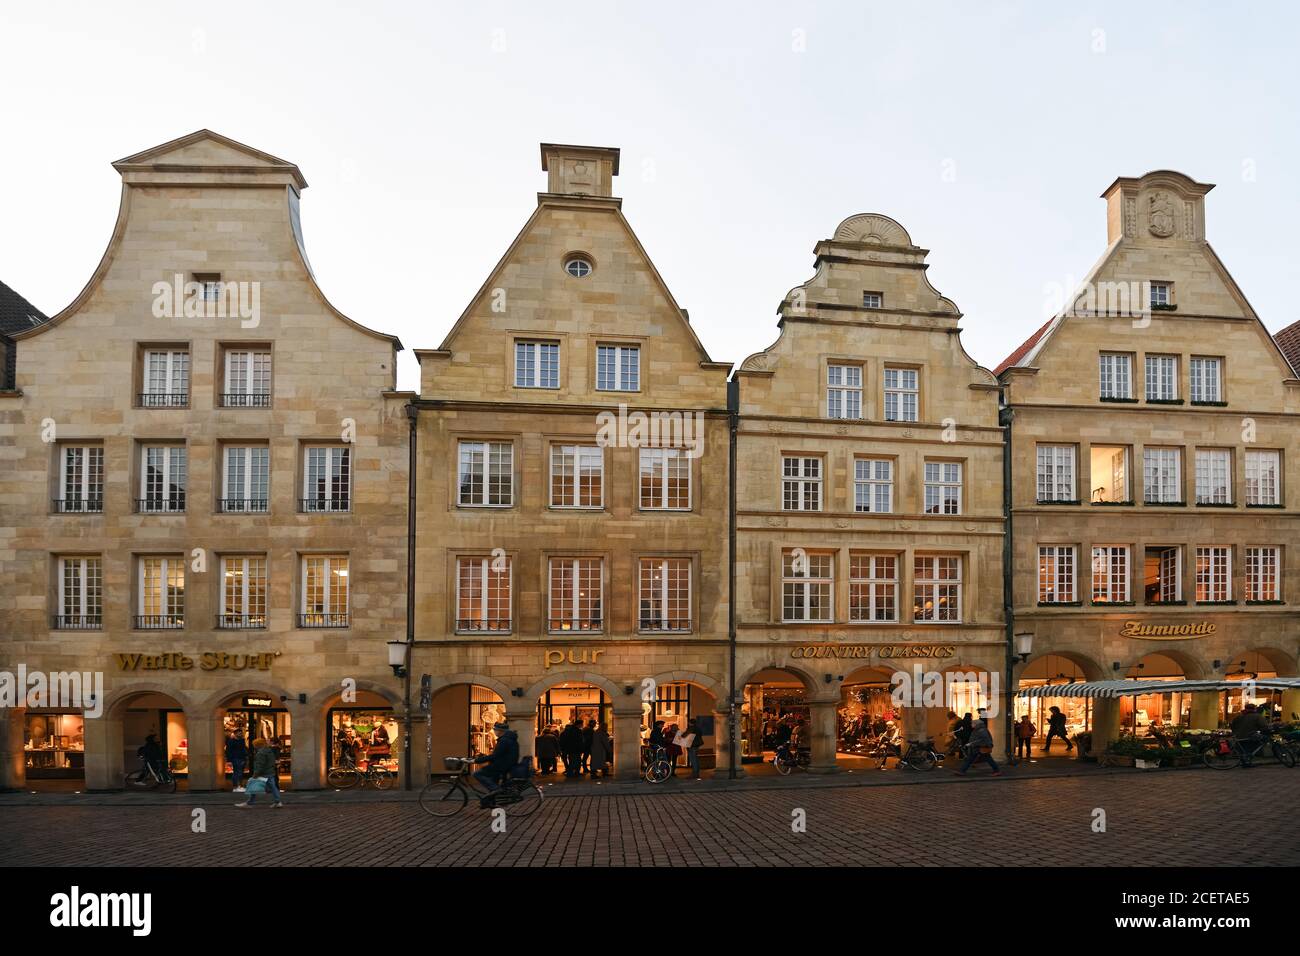 Muenster, Prinzipalmarkt, beautiful old gabled sandstone houses, world famous shopping street, view over cobblestone road, Germany, Europe. Stock Photo